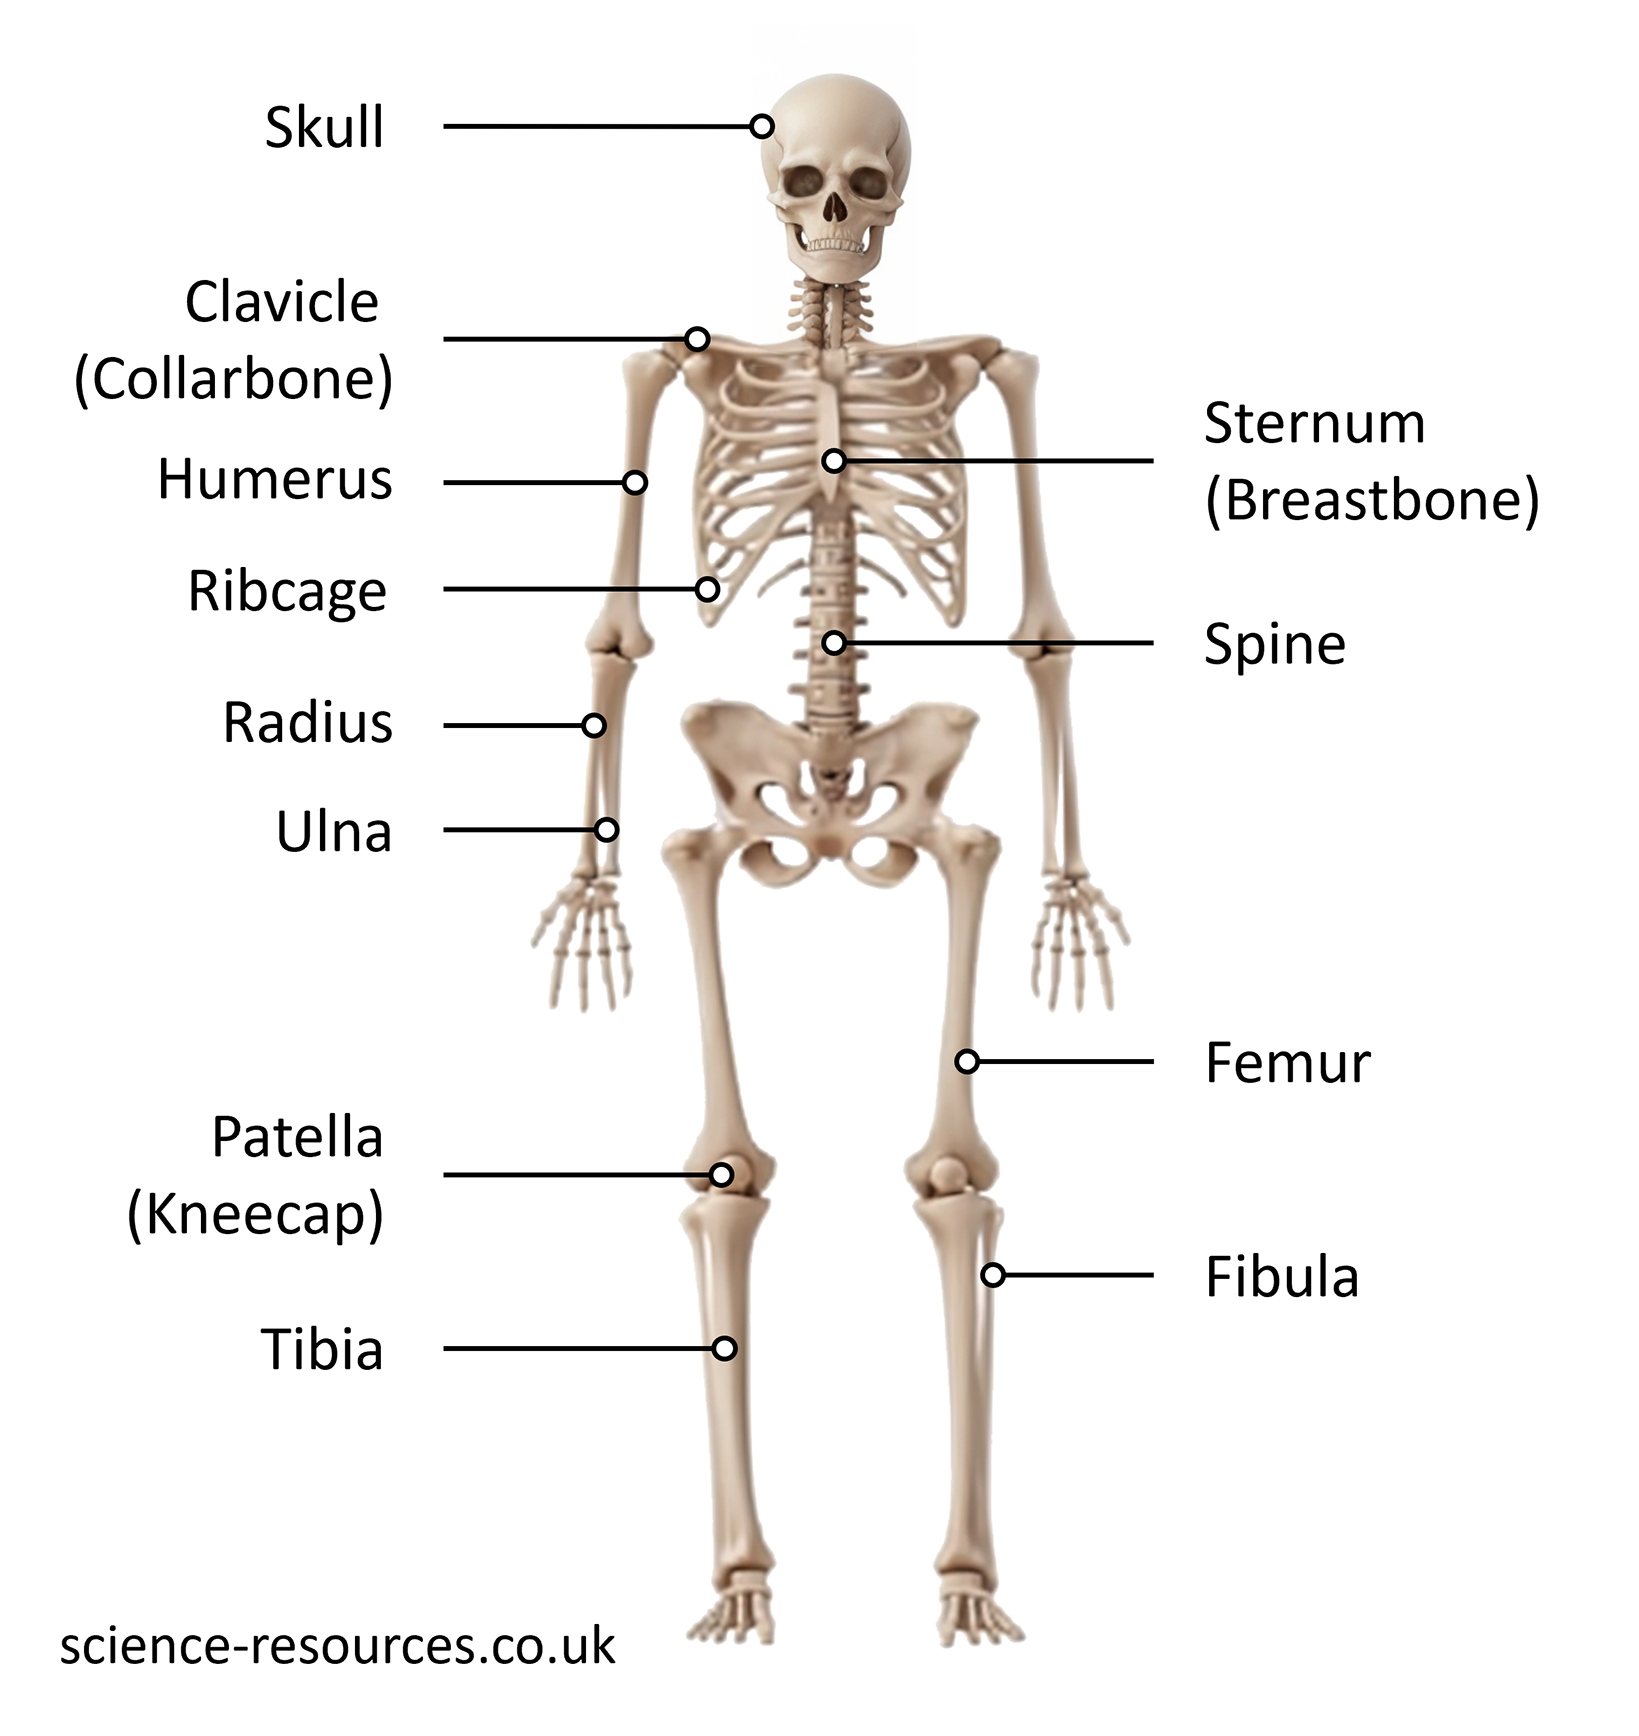 This image is a diagram of a human skeleton with labels indicating the names of various bones. 